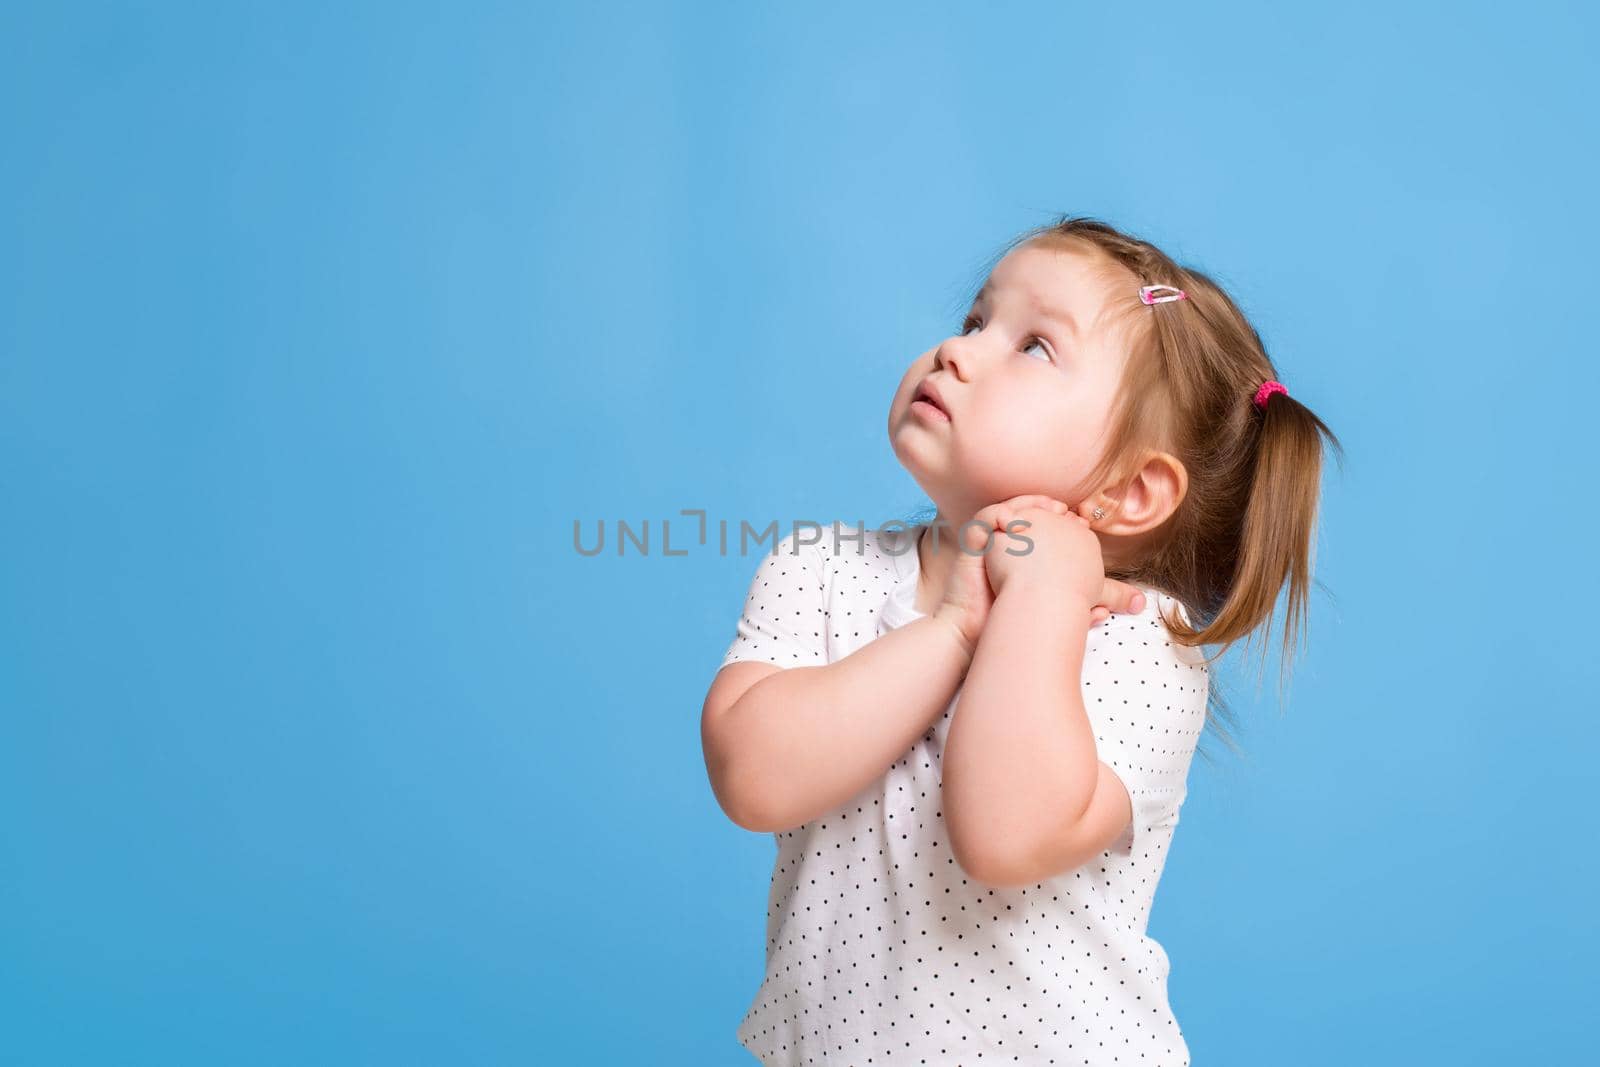 Funny kid in white T-shirt on blue background. Little pretty girl. Copy space for text. Sale, holidays, birthday party concept.